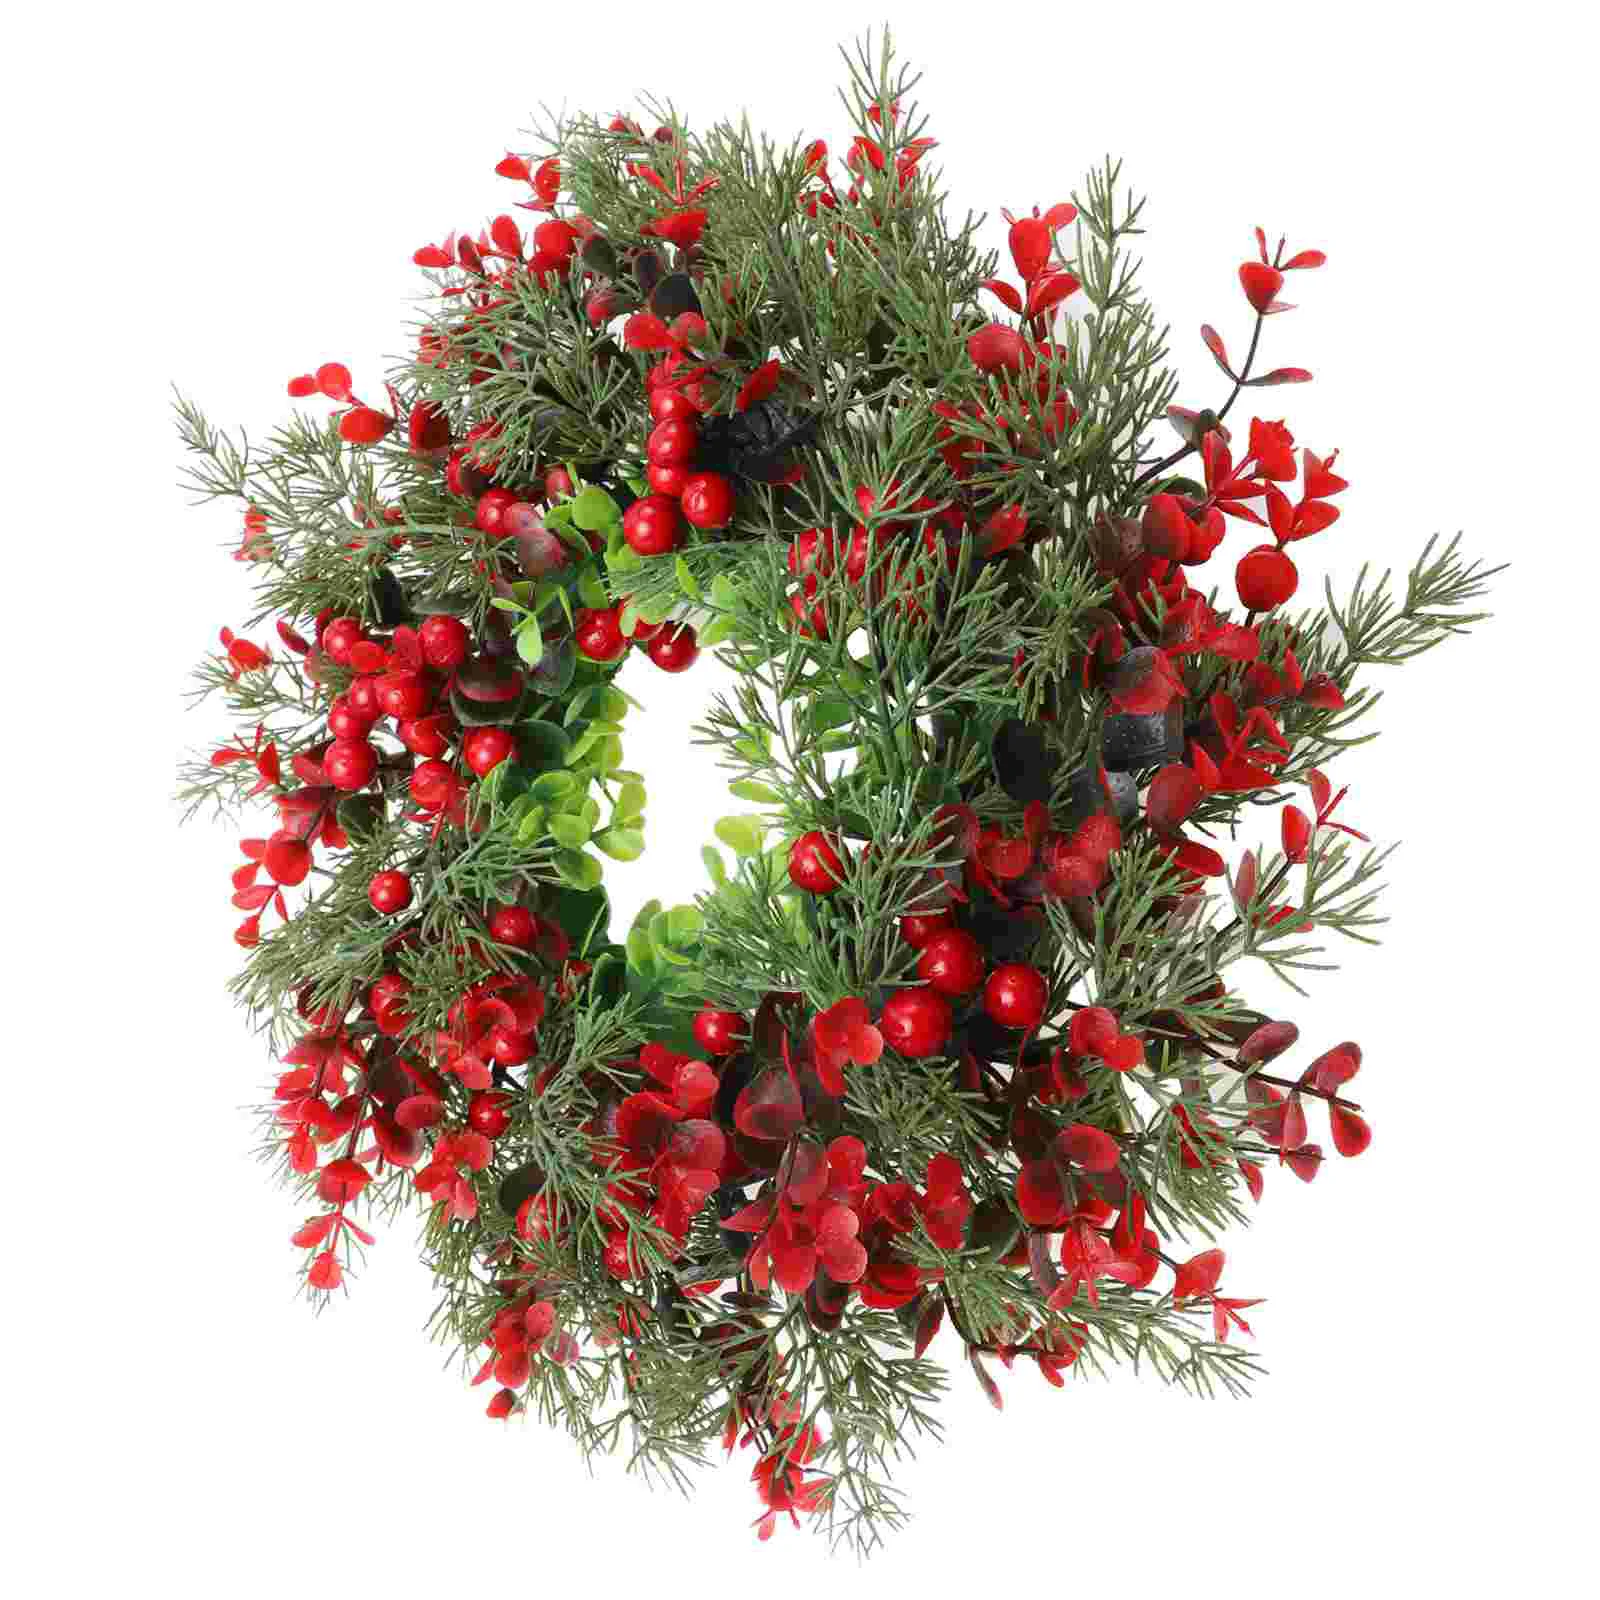 

Wreath Christmas Door Berry Wreaths Front Artificial Xmas Garland Red Outdoor Winter Pine Decor Holiday Hanging Windows Holly